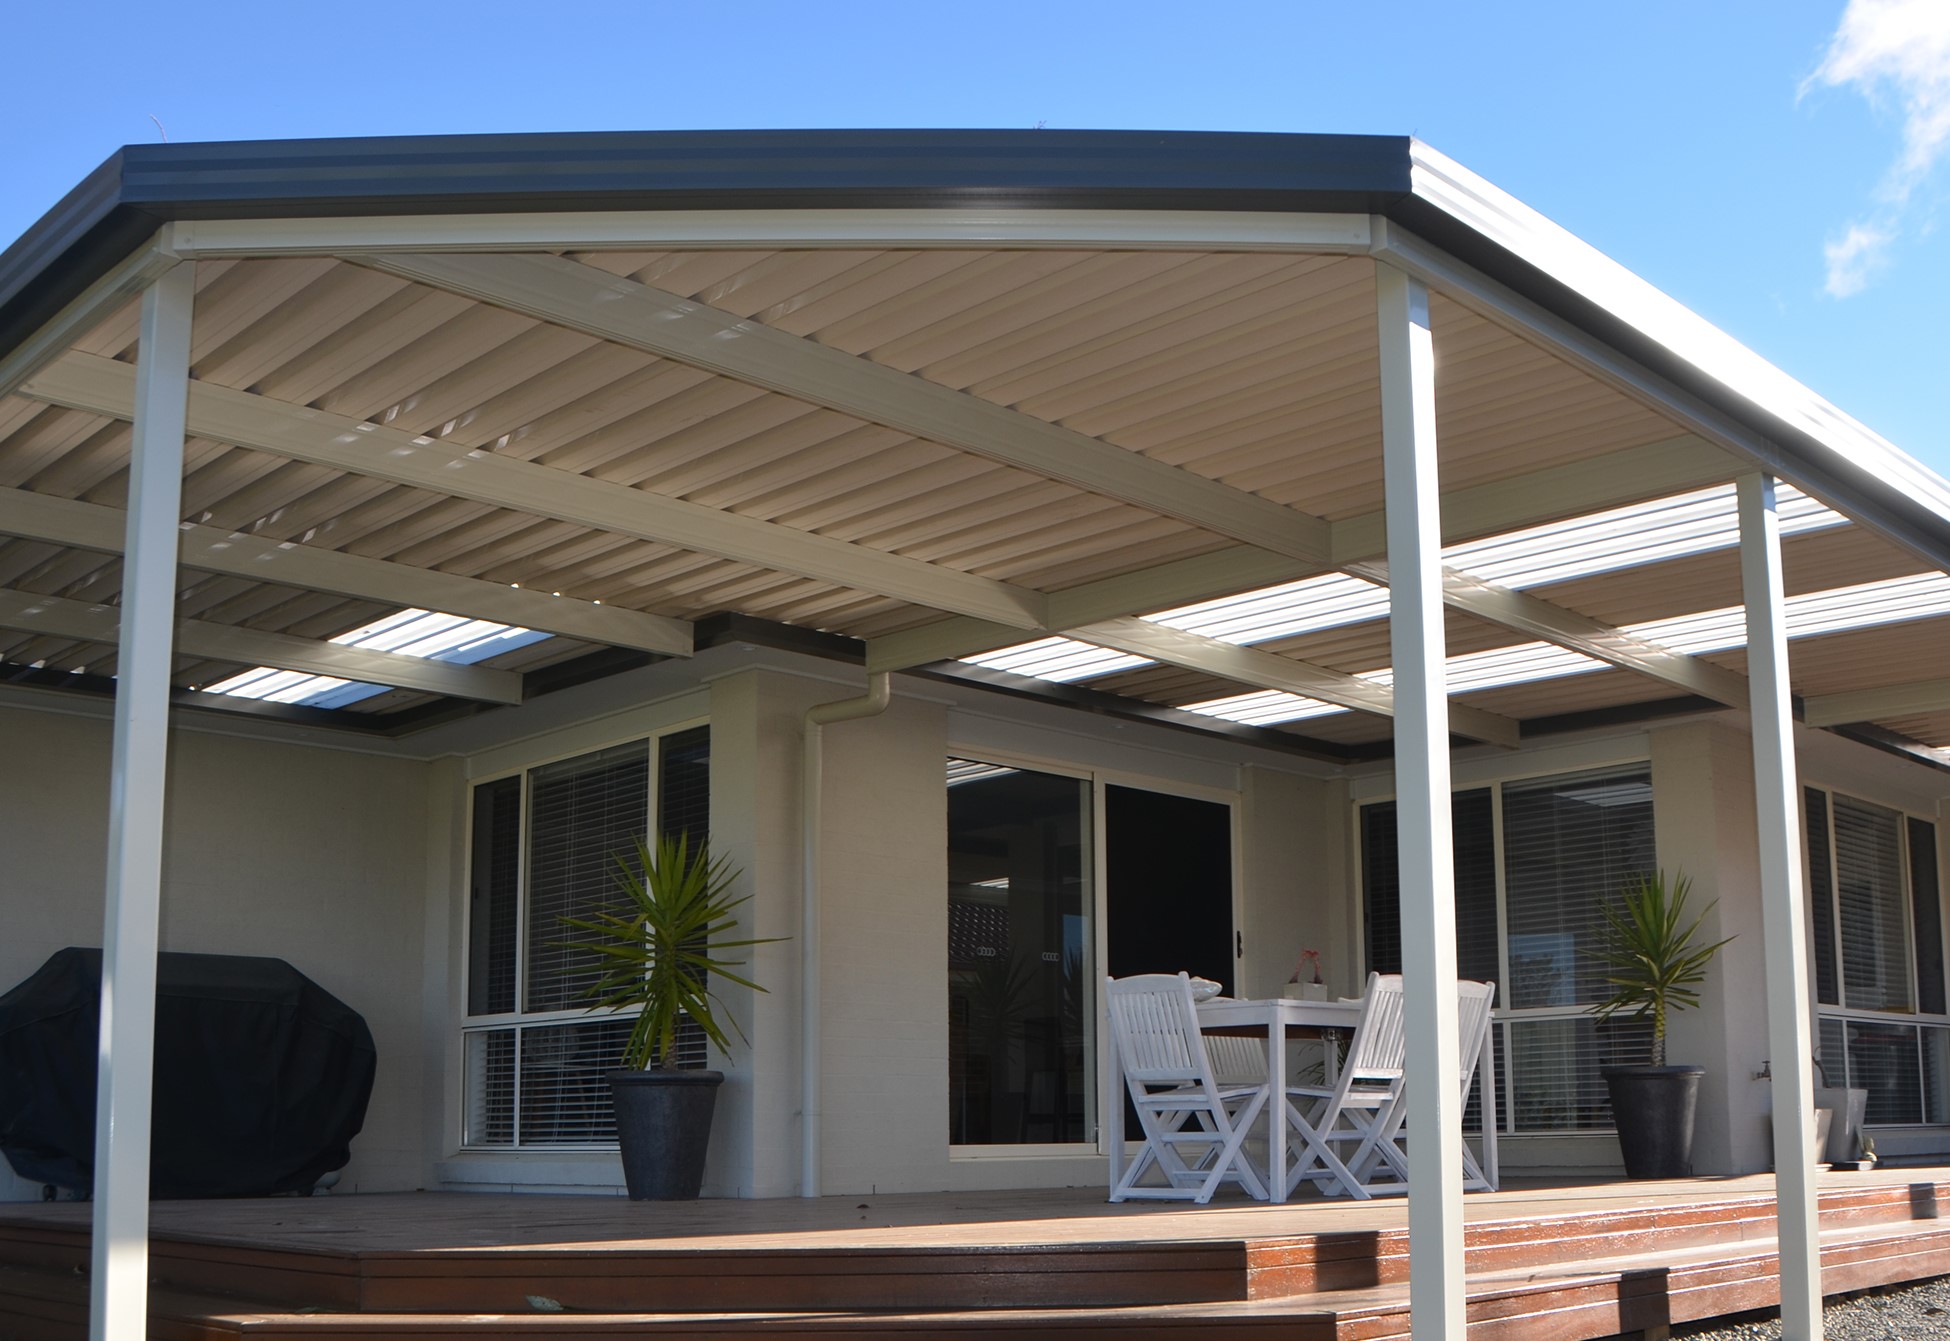 Stramit Monoclad roof sheeting on patio roof